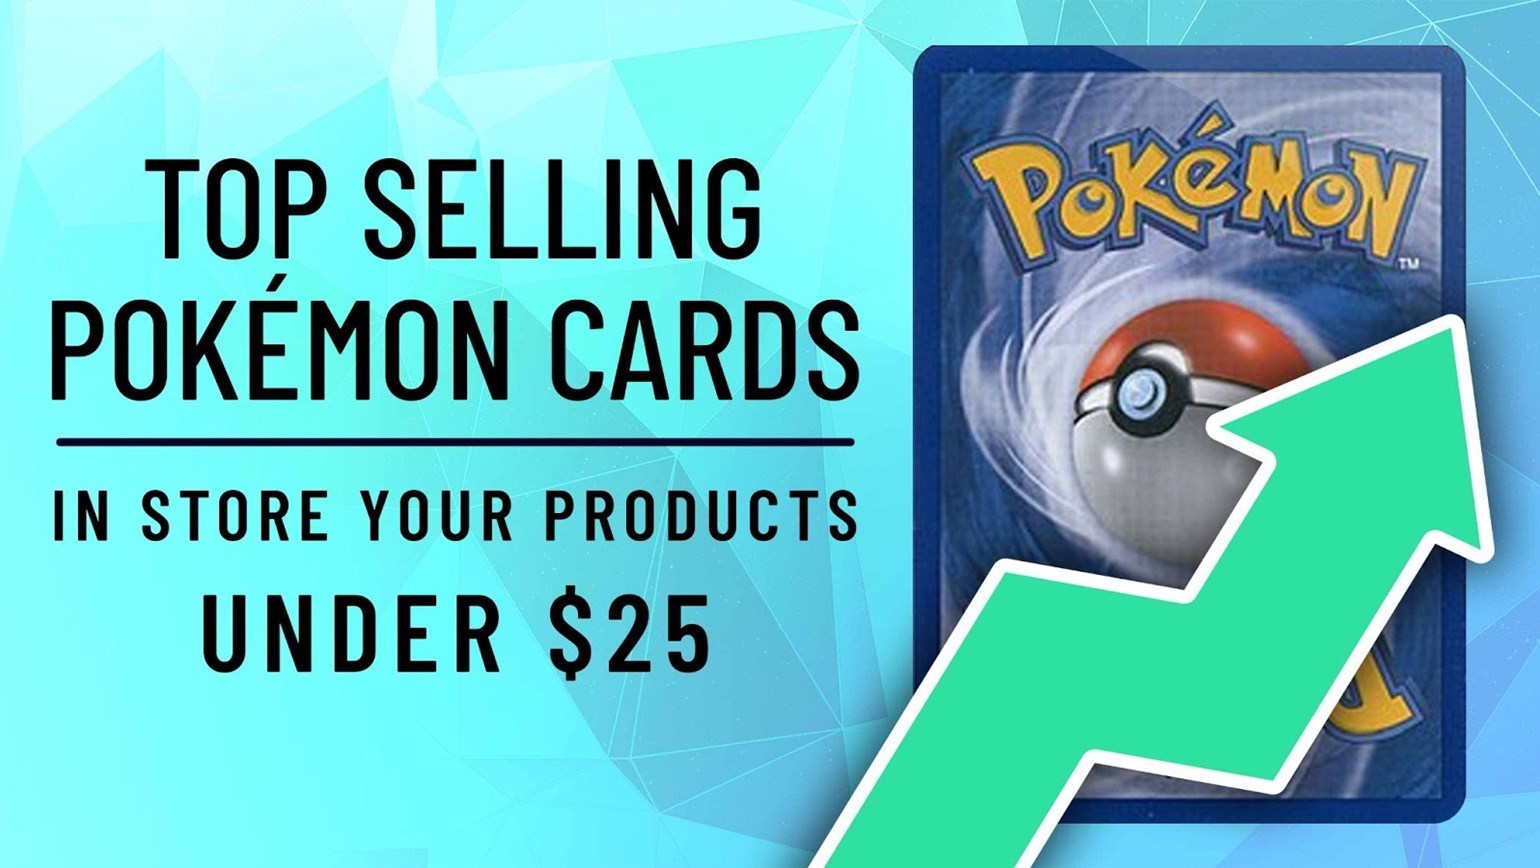 Top Selling Pokémon Cards in Store Your Products: July 2021